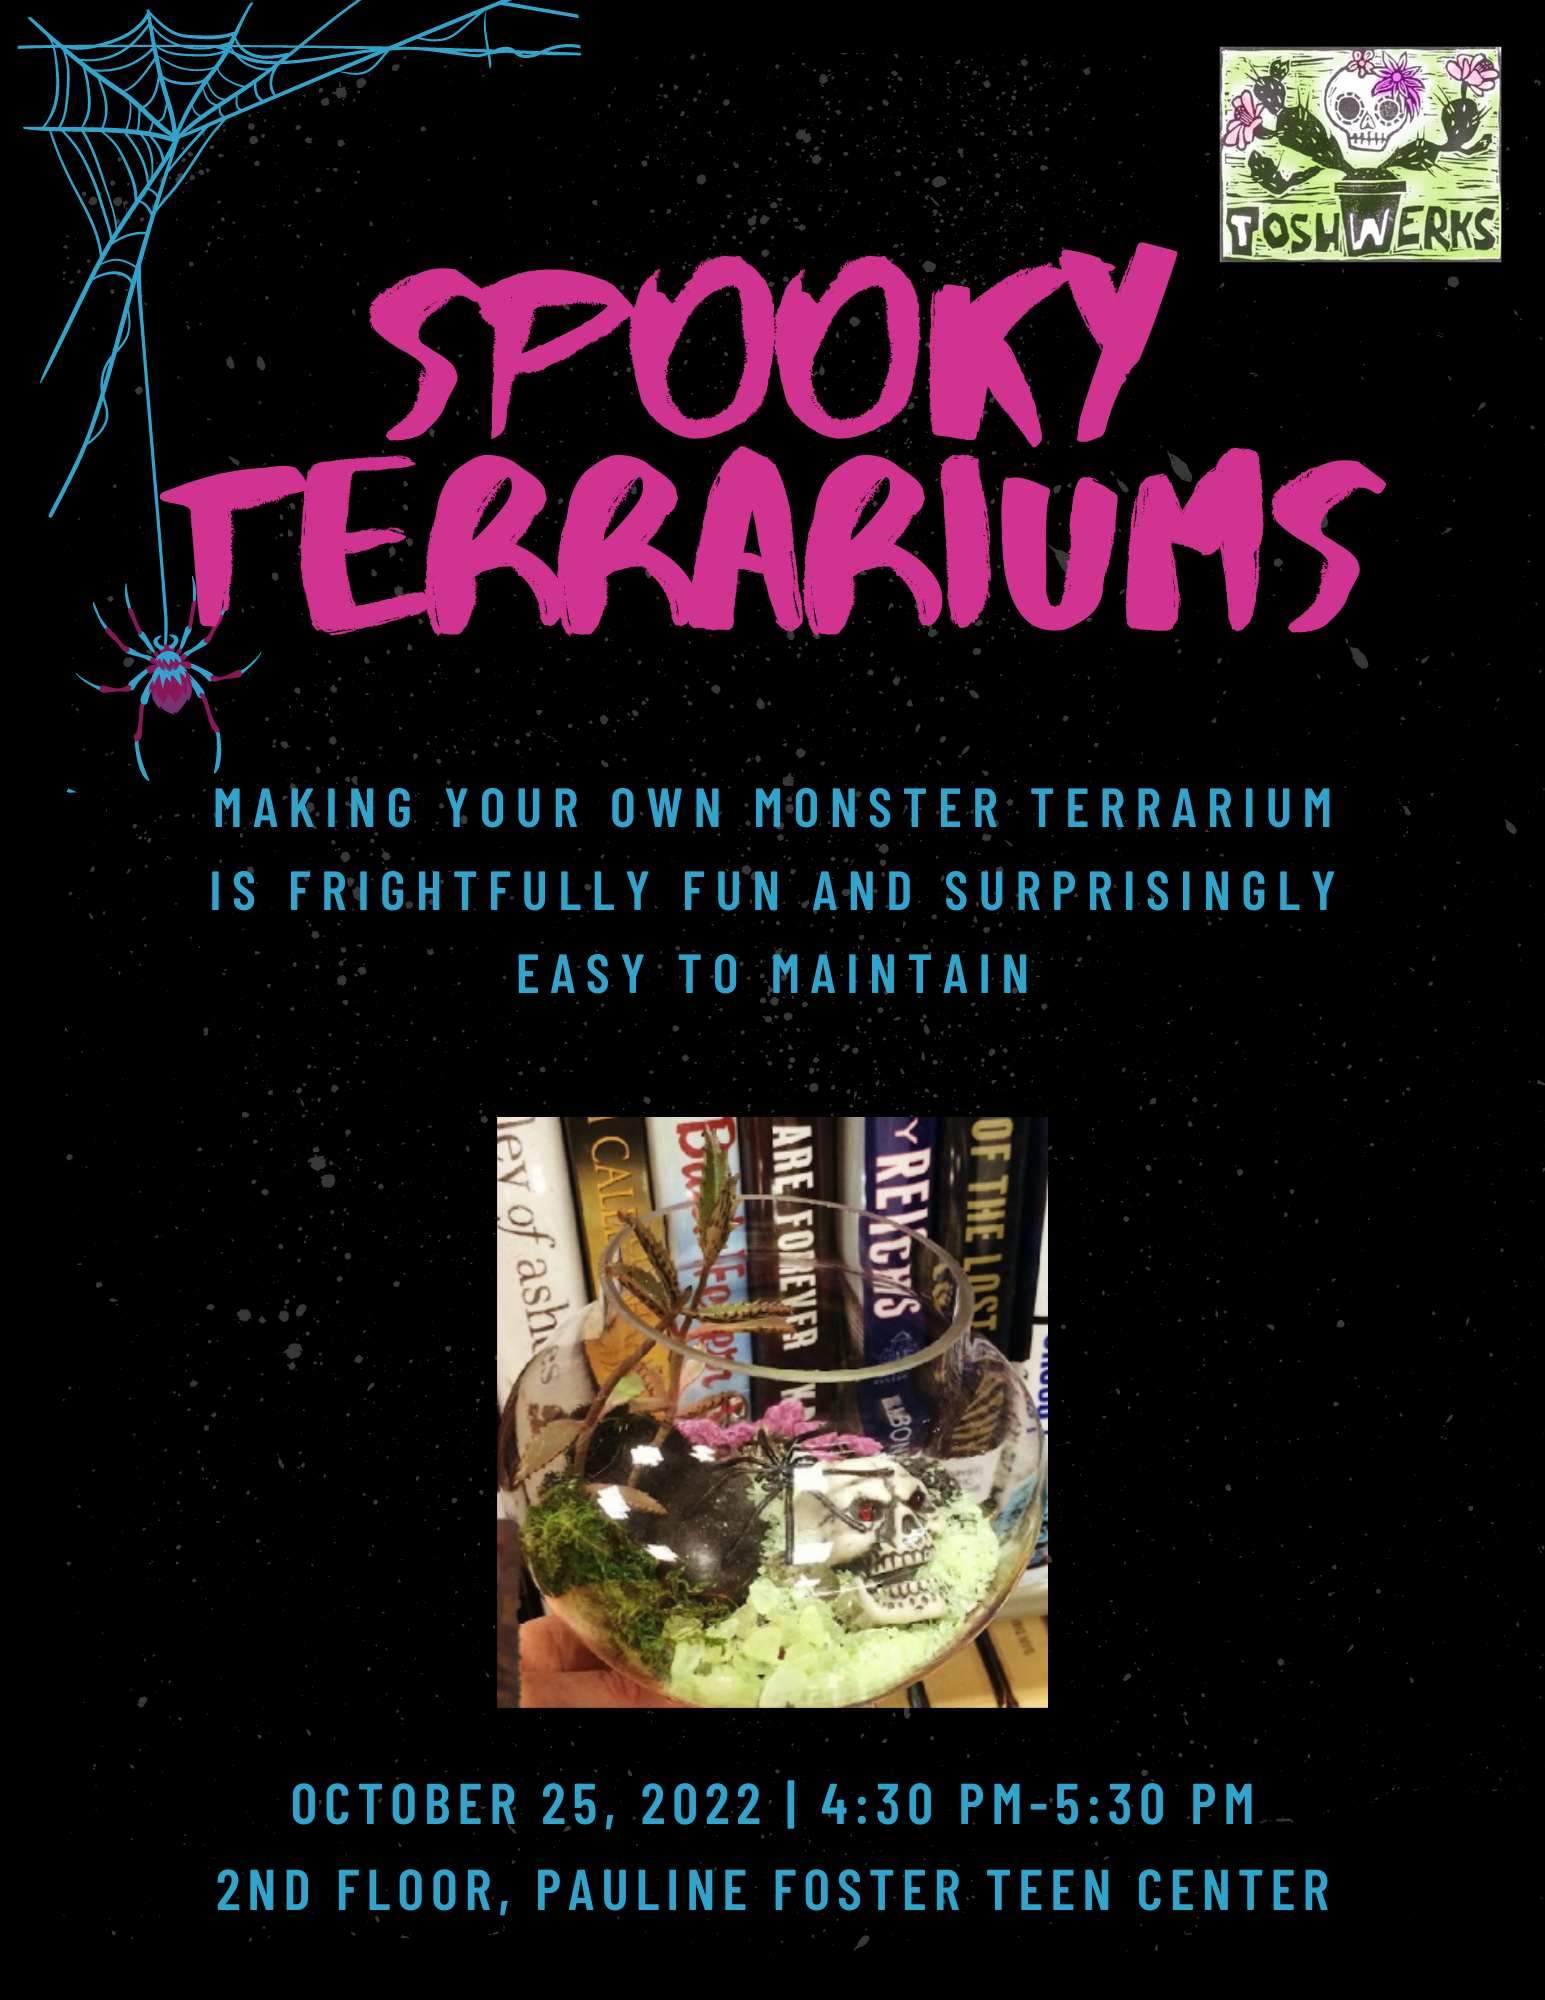 Spooky Terrariums. Making your own monster terrarium is frightfully fun and surprisingly easy to maintain. October 25, 2022. 4:30 PM to 5:30 PM. 2nd floor, Pauline Foster Teen Center. 